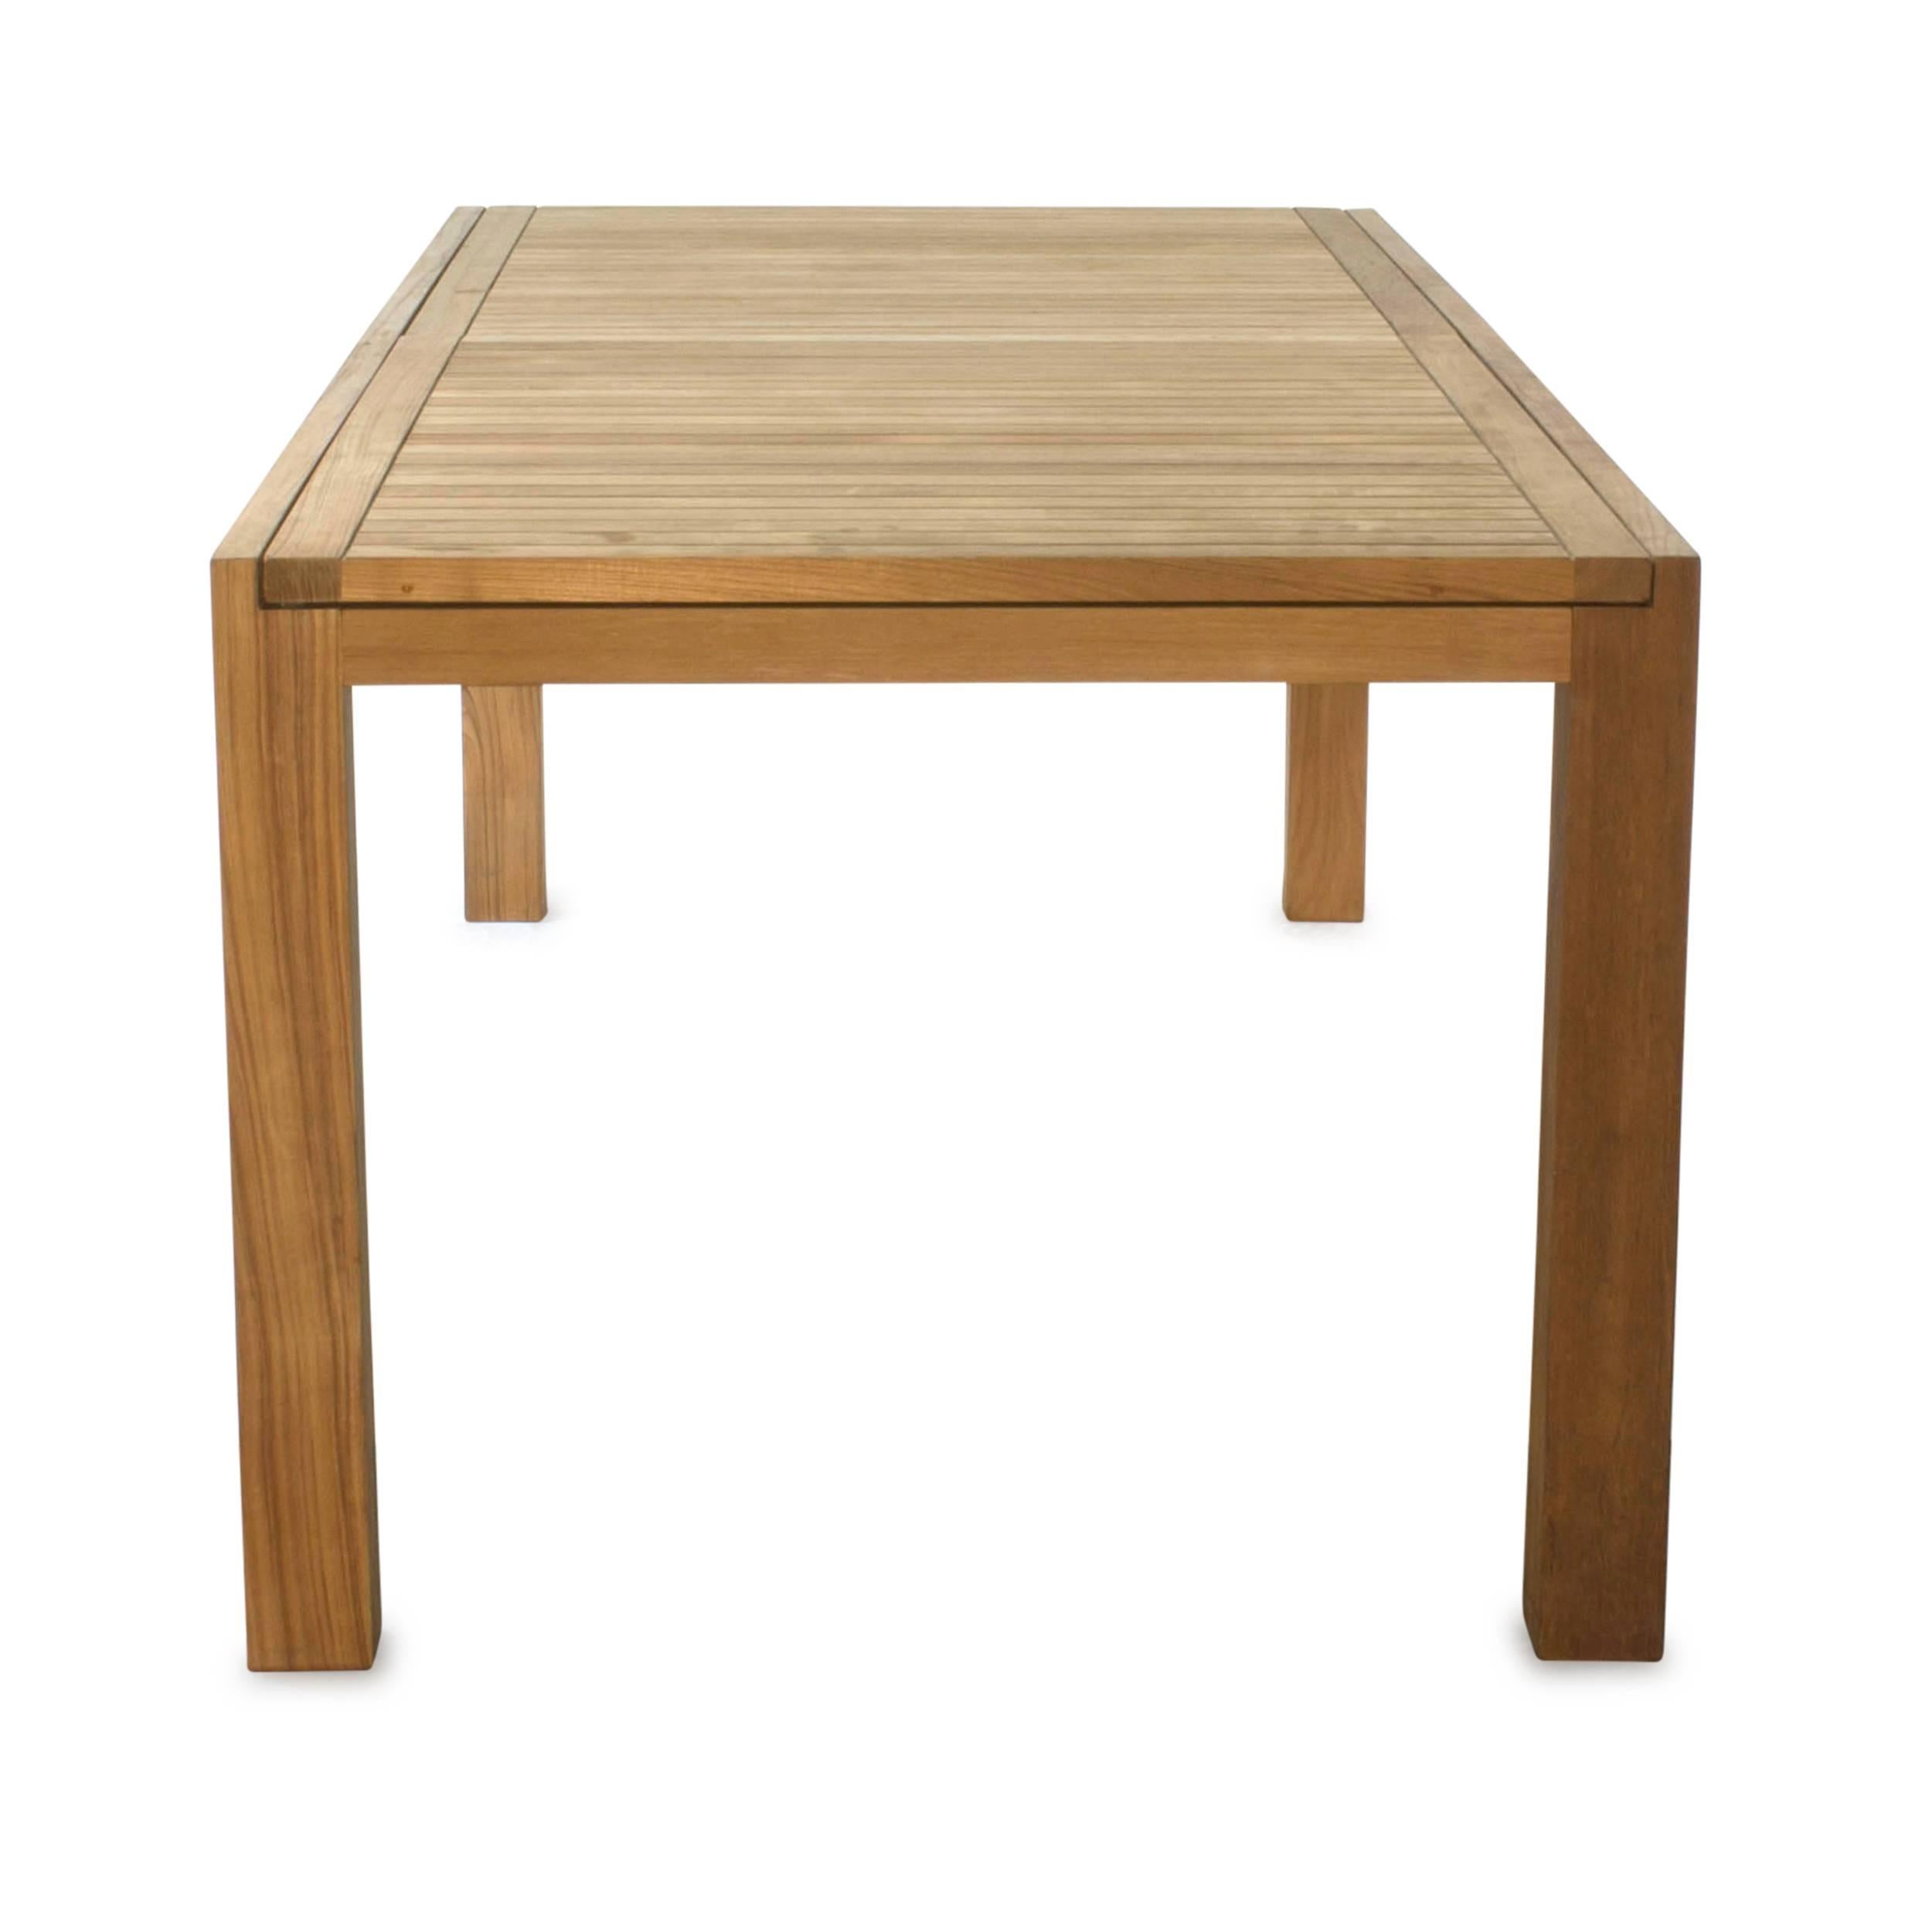 Teak Ixit 360 Outdoor Extending Dining Table by Royal Botania In Fair Condition For Sale In Brooklyn, NY